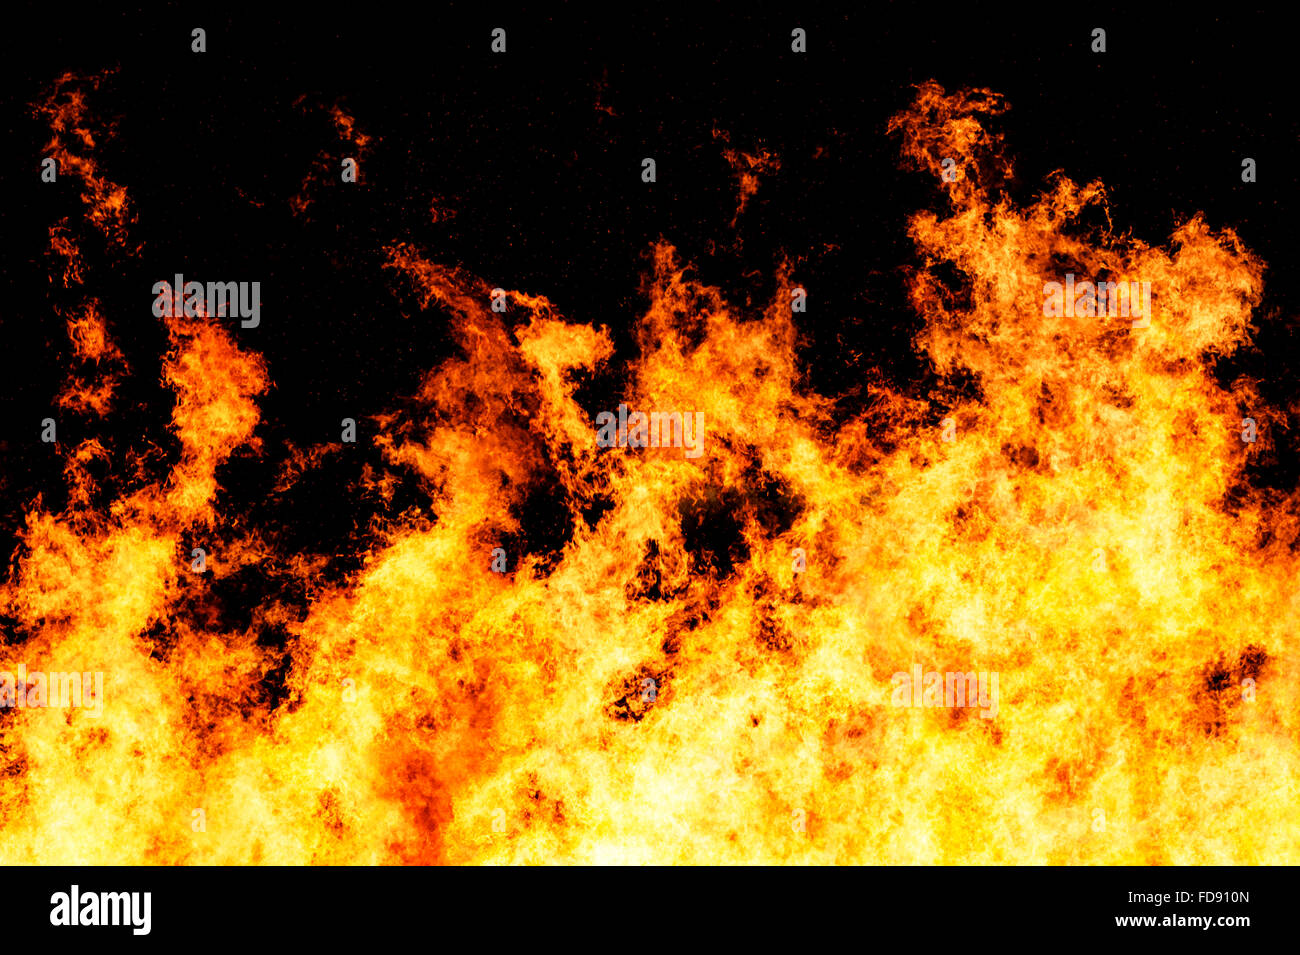 Raging fire shot at a high shutter speed to freeze the motion of the flames Stock Photo